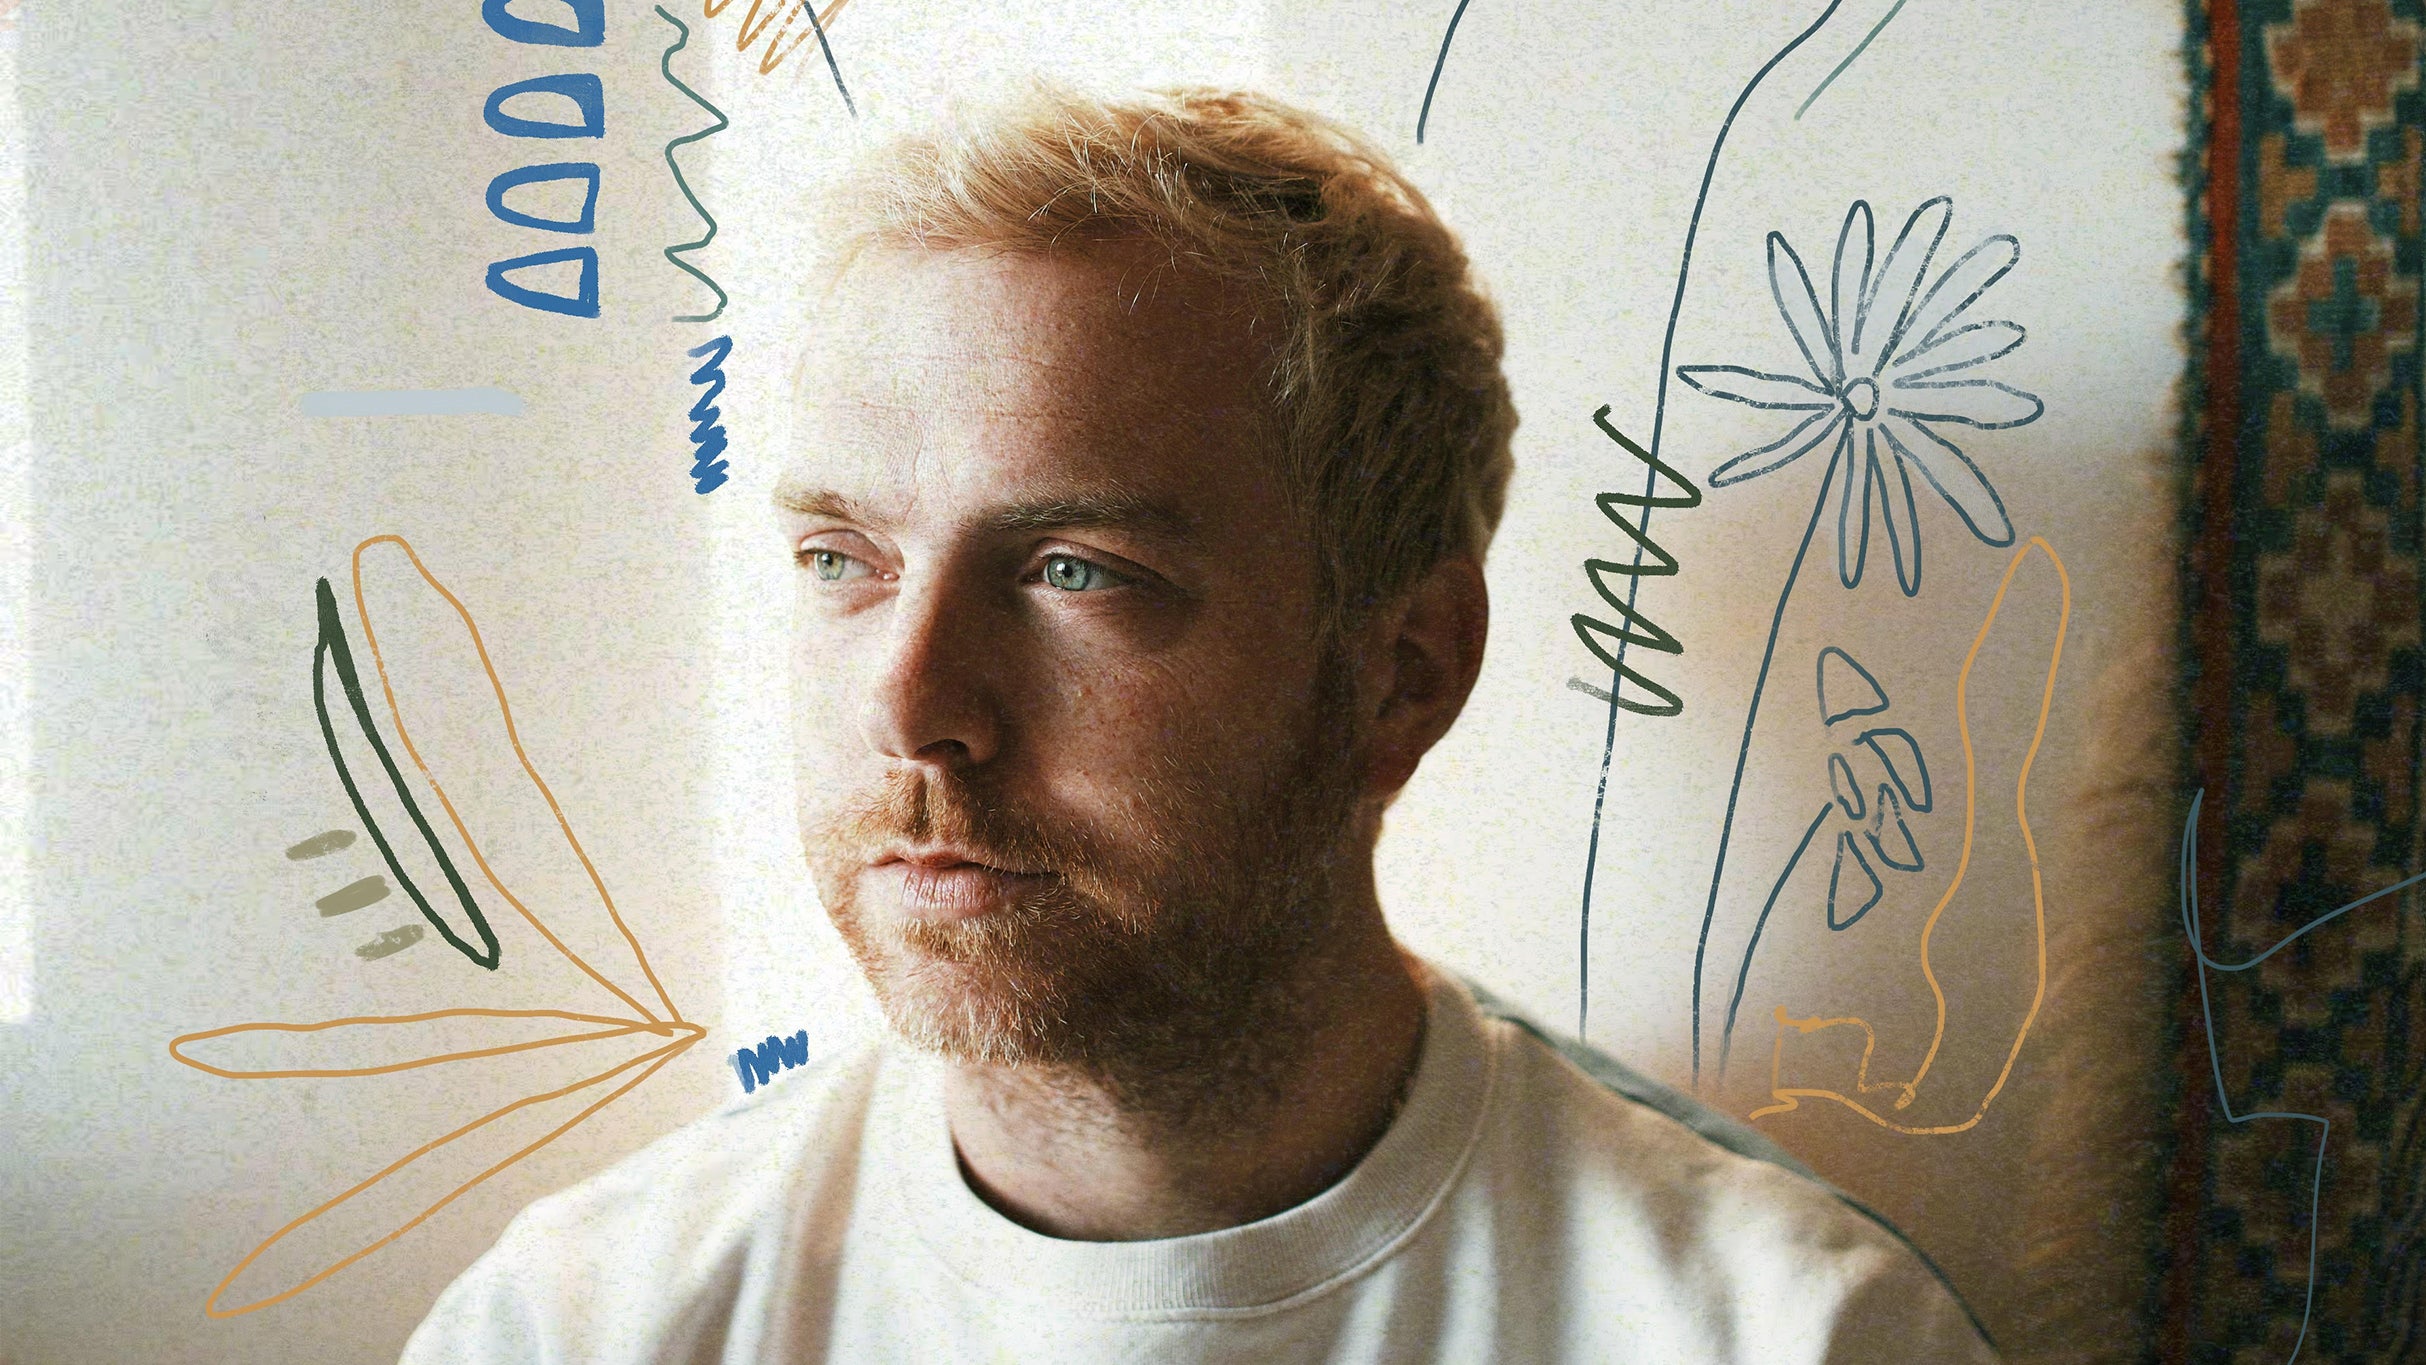 presale code to Trevor Hall - An Evening In A Blue Sky Mind tickets in Houston at House of Blues Houston